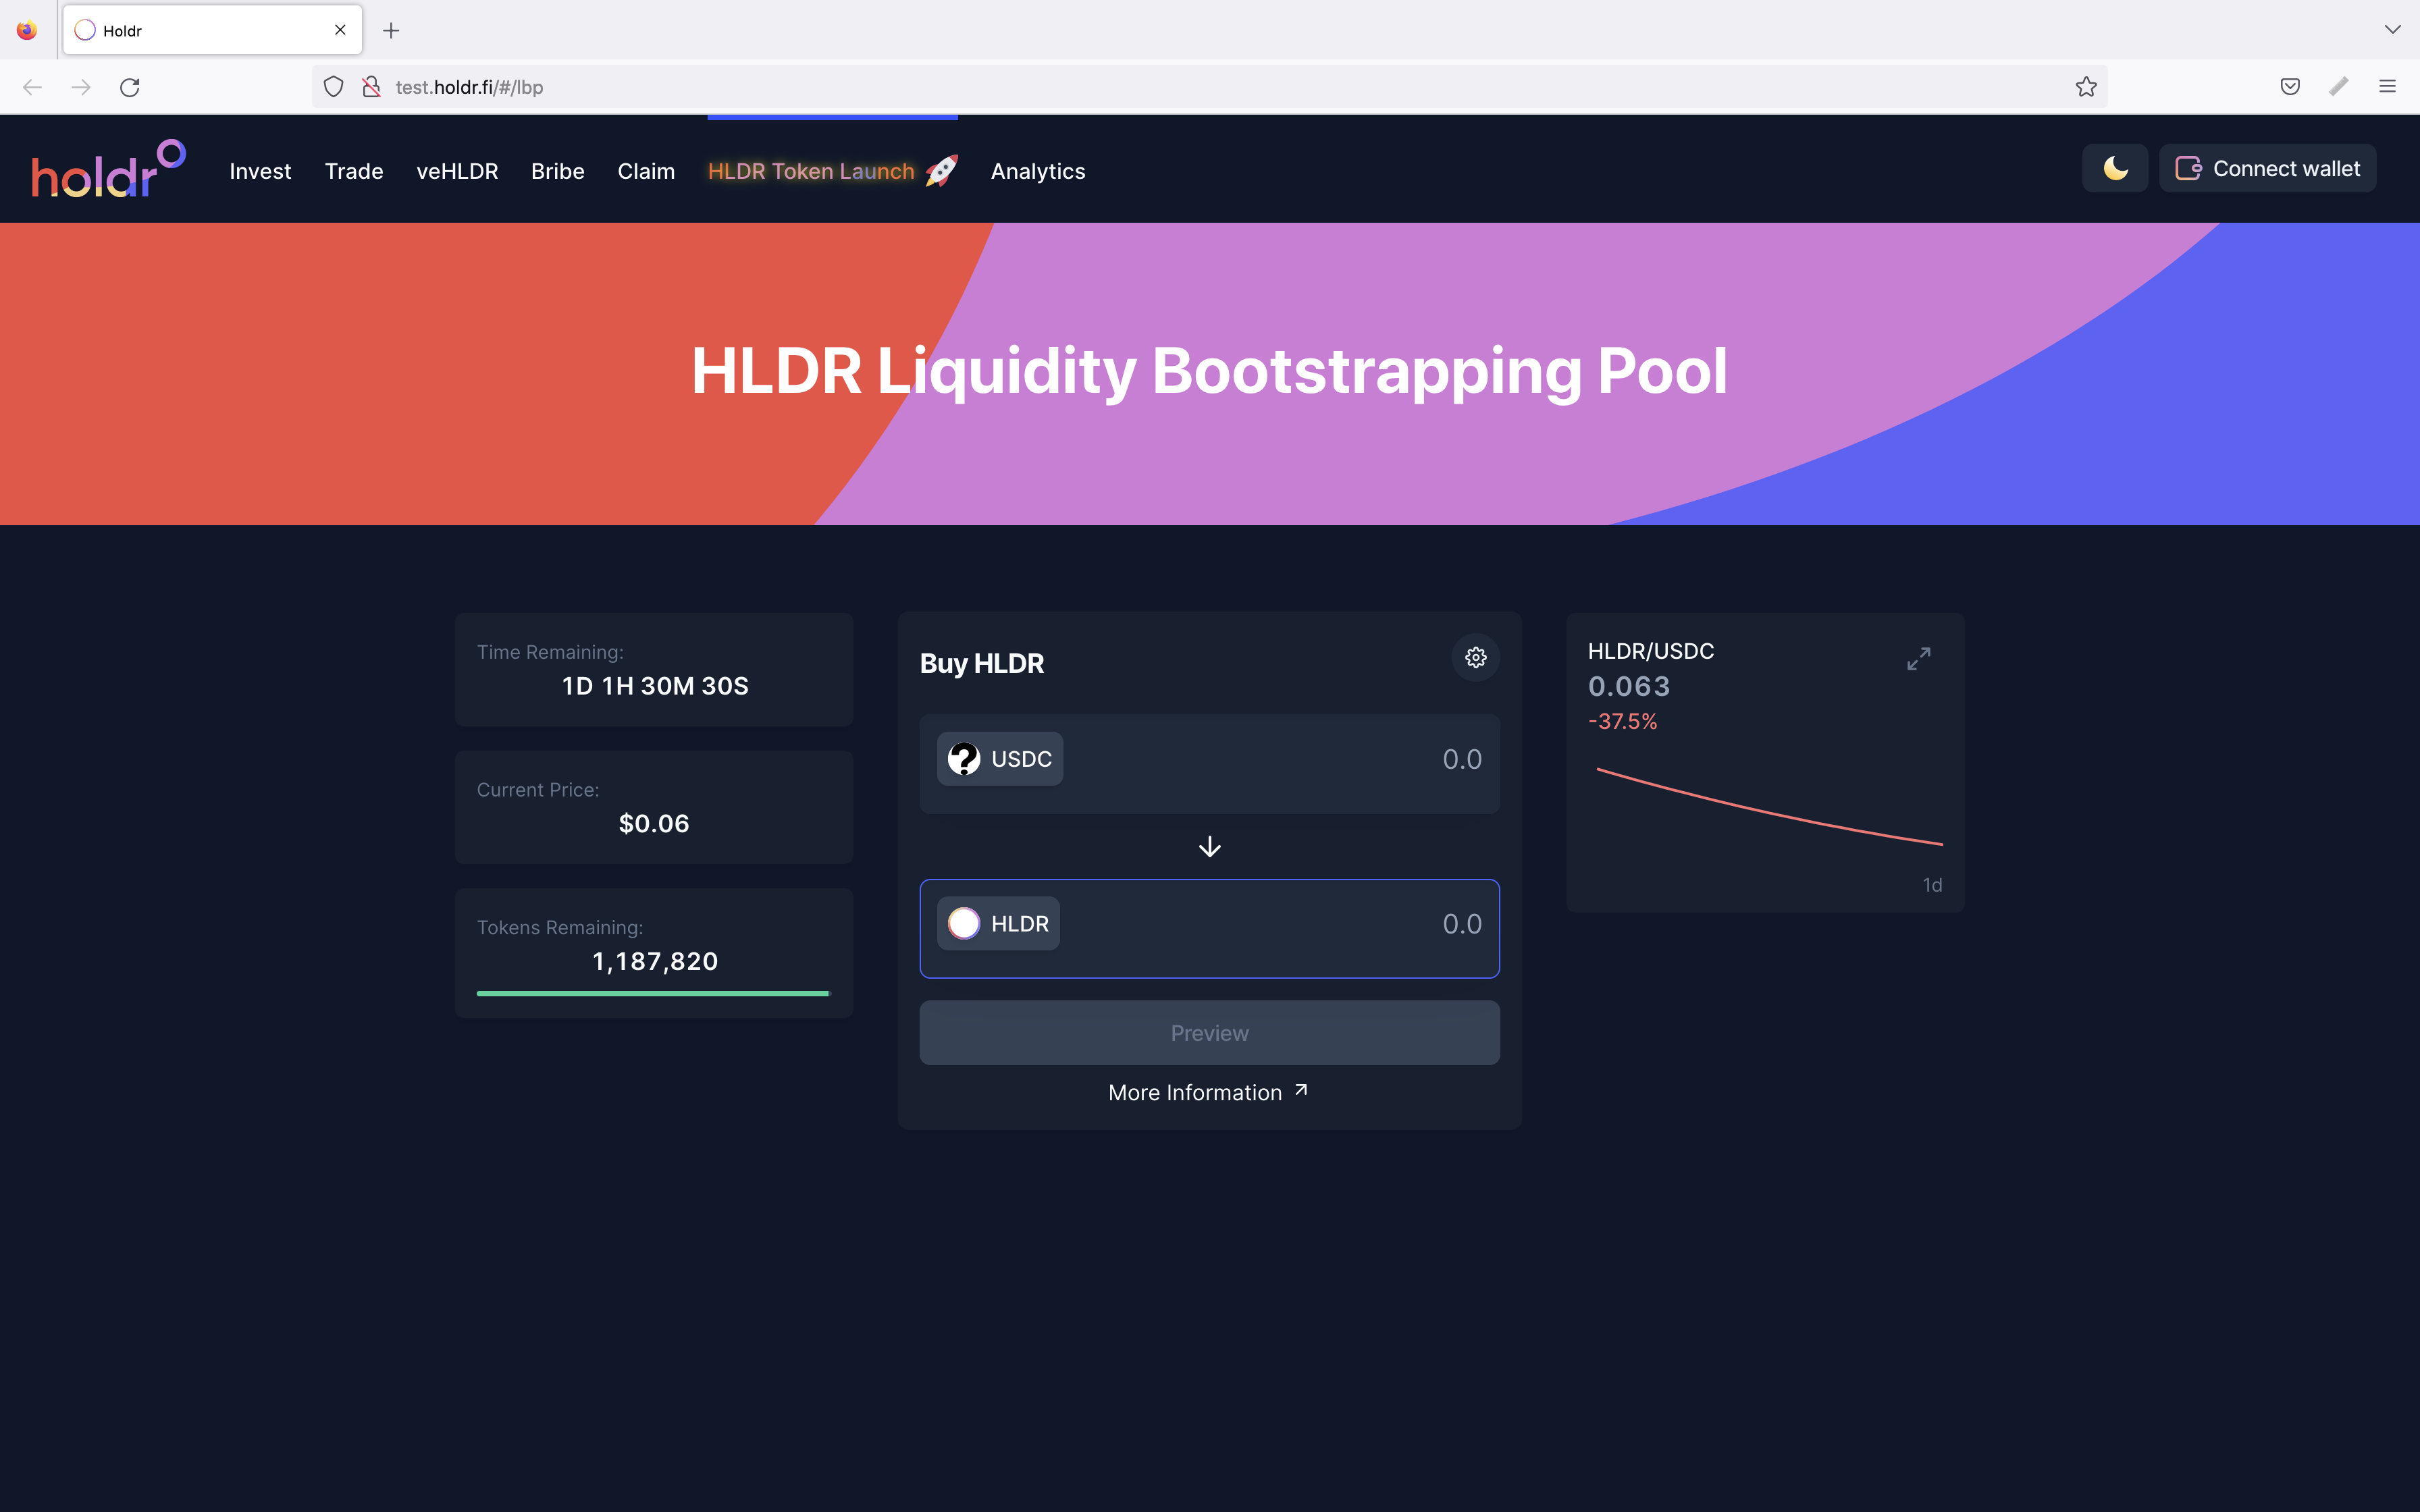 Note: The Liquidity Bootstrapping Event interface is not yet online.